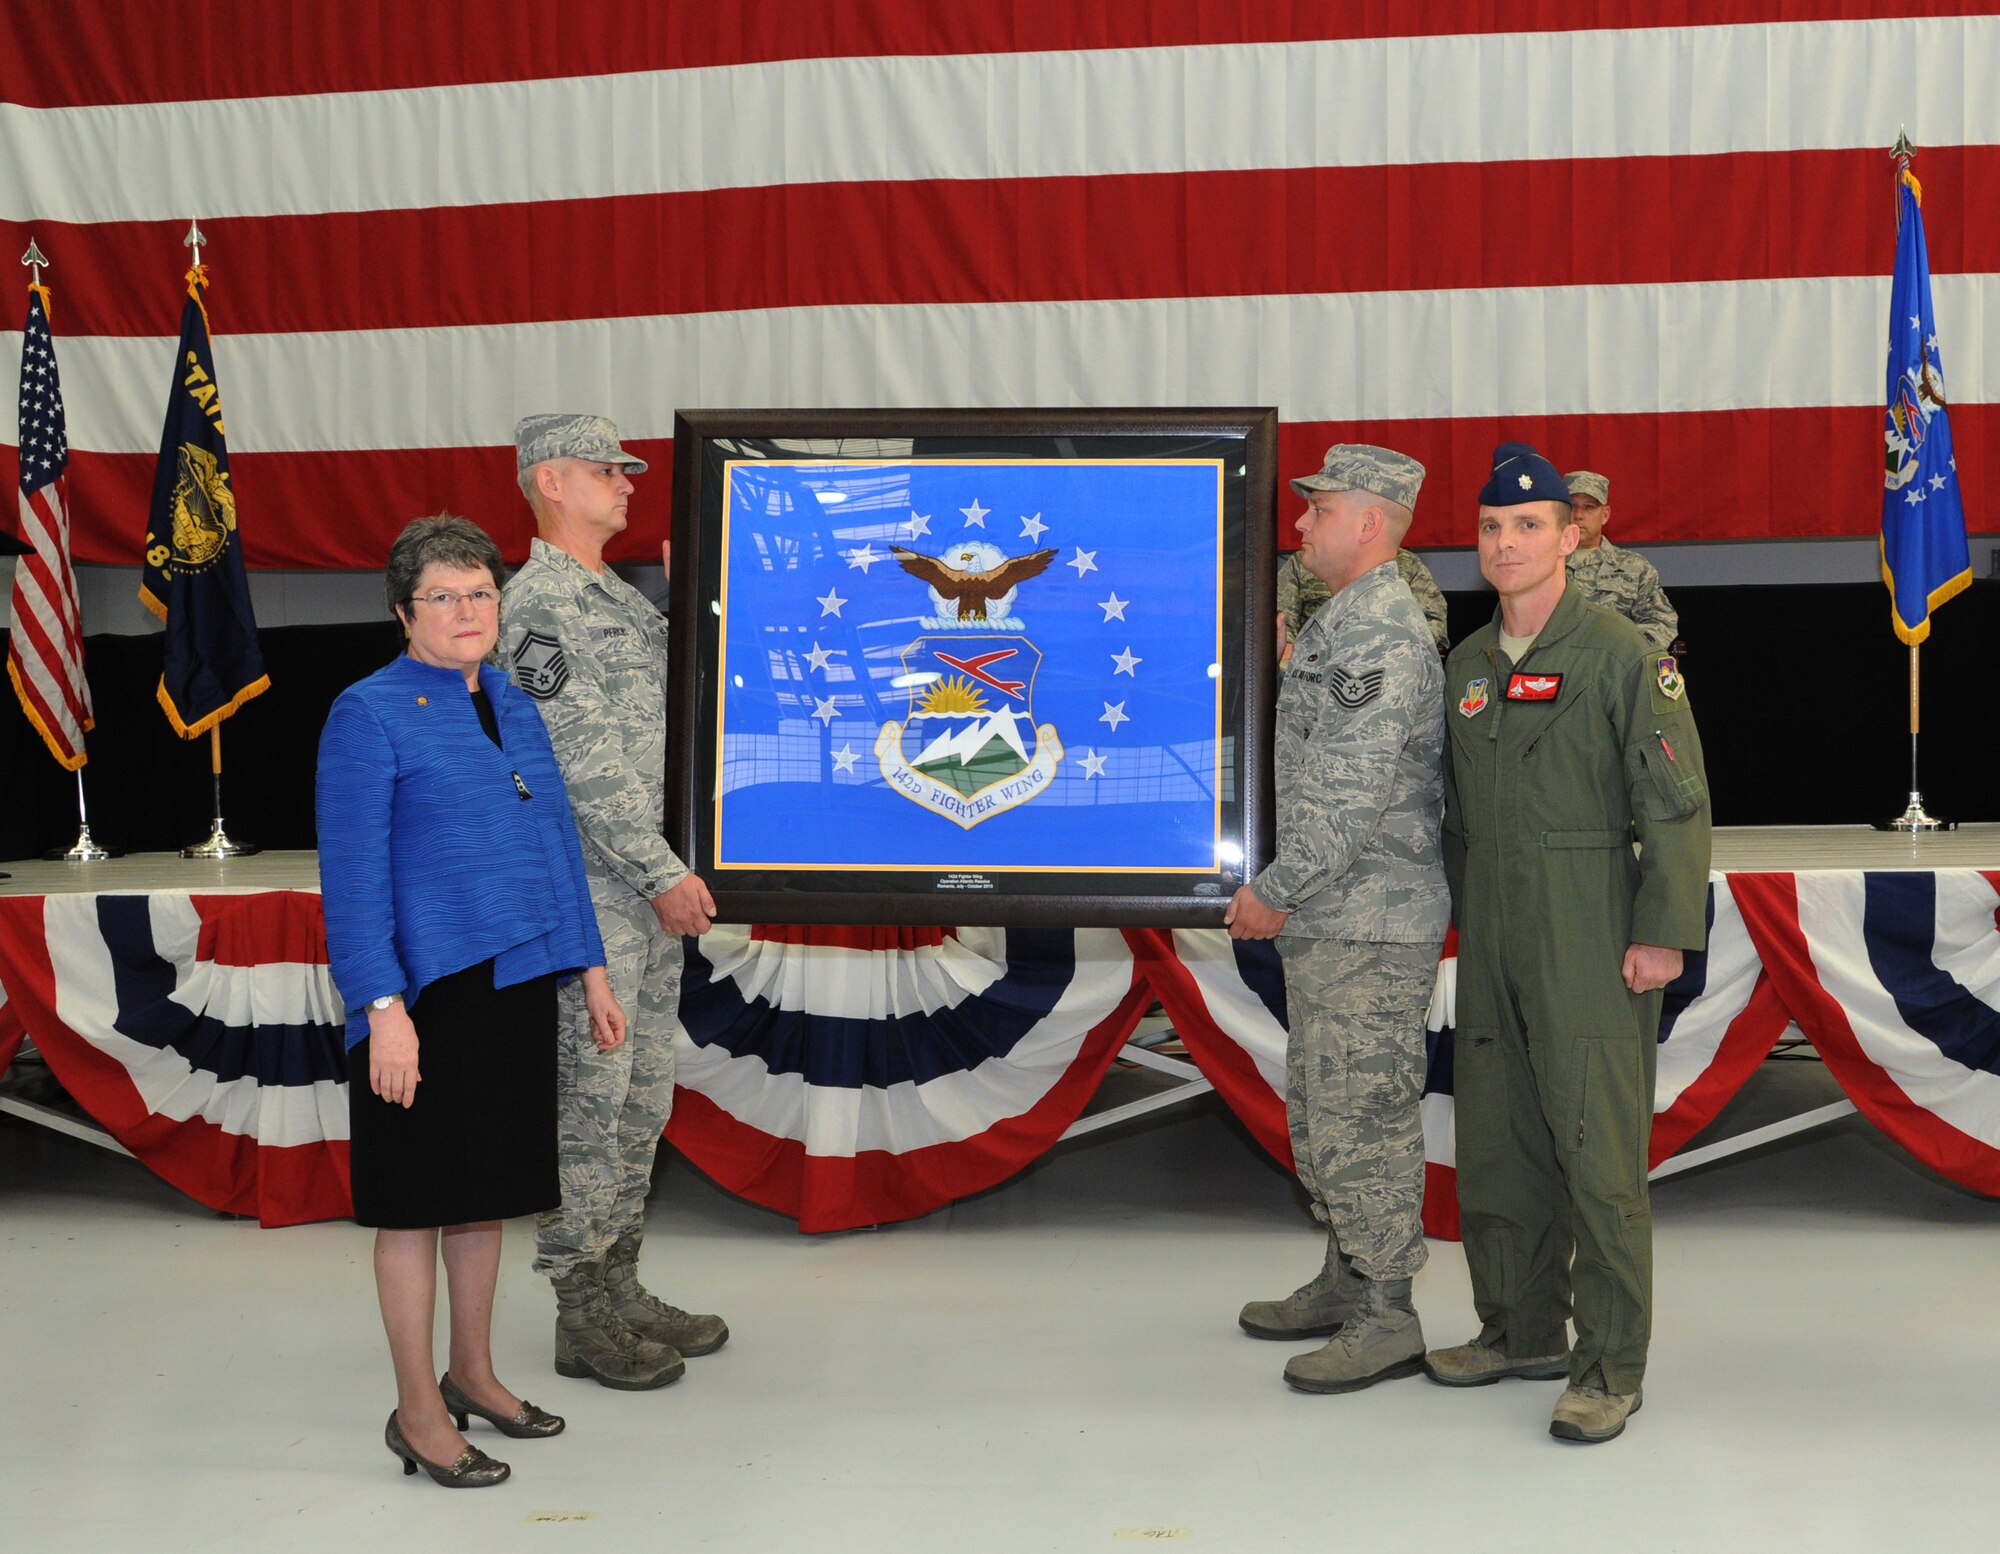 Oregon Secretary of State Jeanne Atkins, left, stands with Lt. Col. Sean Sullivan, 123rd Fighter Squadron commander, right, as the unit flag for the 142nd Fighter Wing is presented during the demobilization ceremony for the 123rd Expeditionary Fighter Squadron, 142nd Fighter Wing, Nov. 6, 2015, Portland Air National Guard Base, Ore. (U.S. Air National Guard photo by Tech. Sgt. John Hughel, 142nd Fighter Wing Public Affairs/Released)